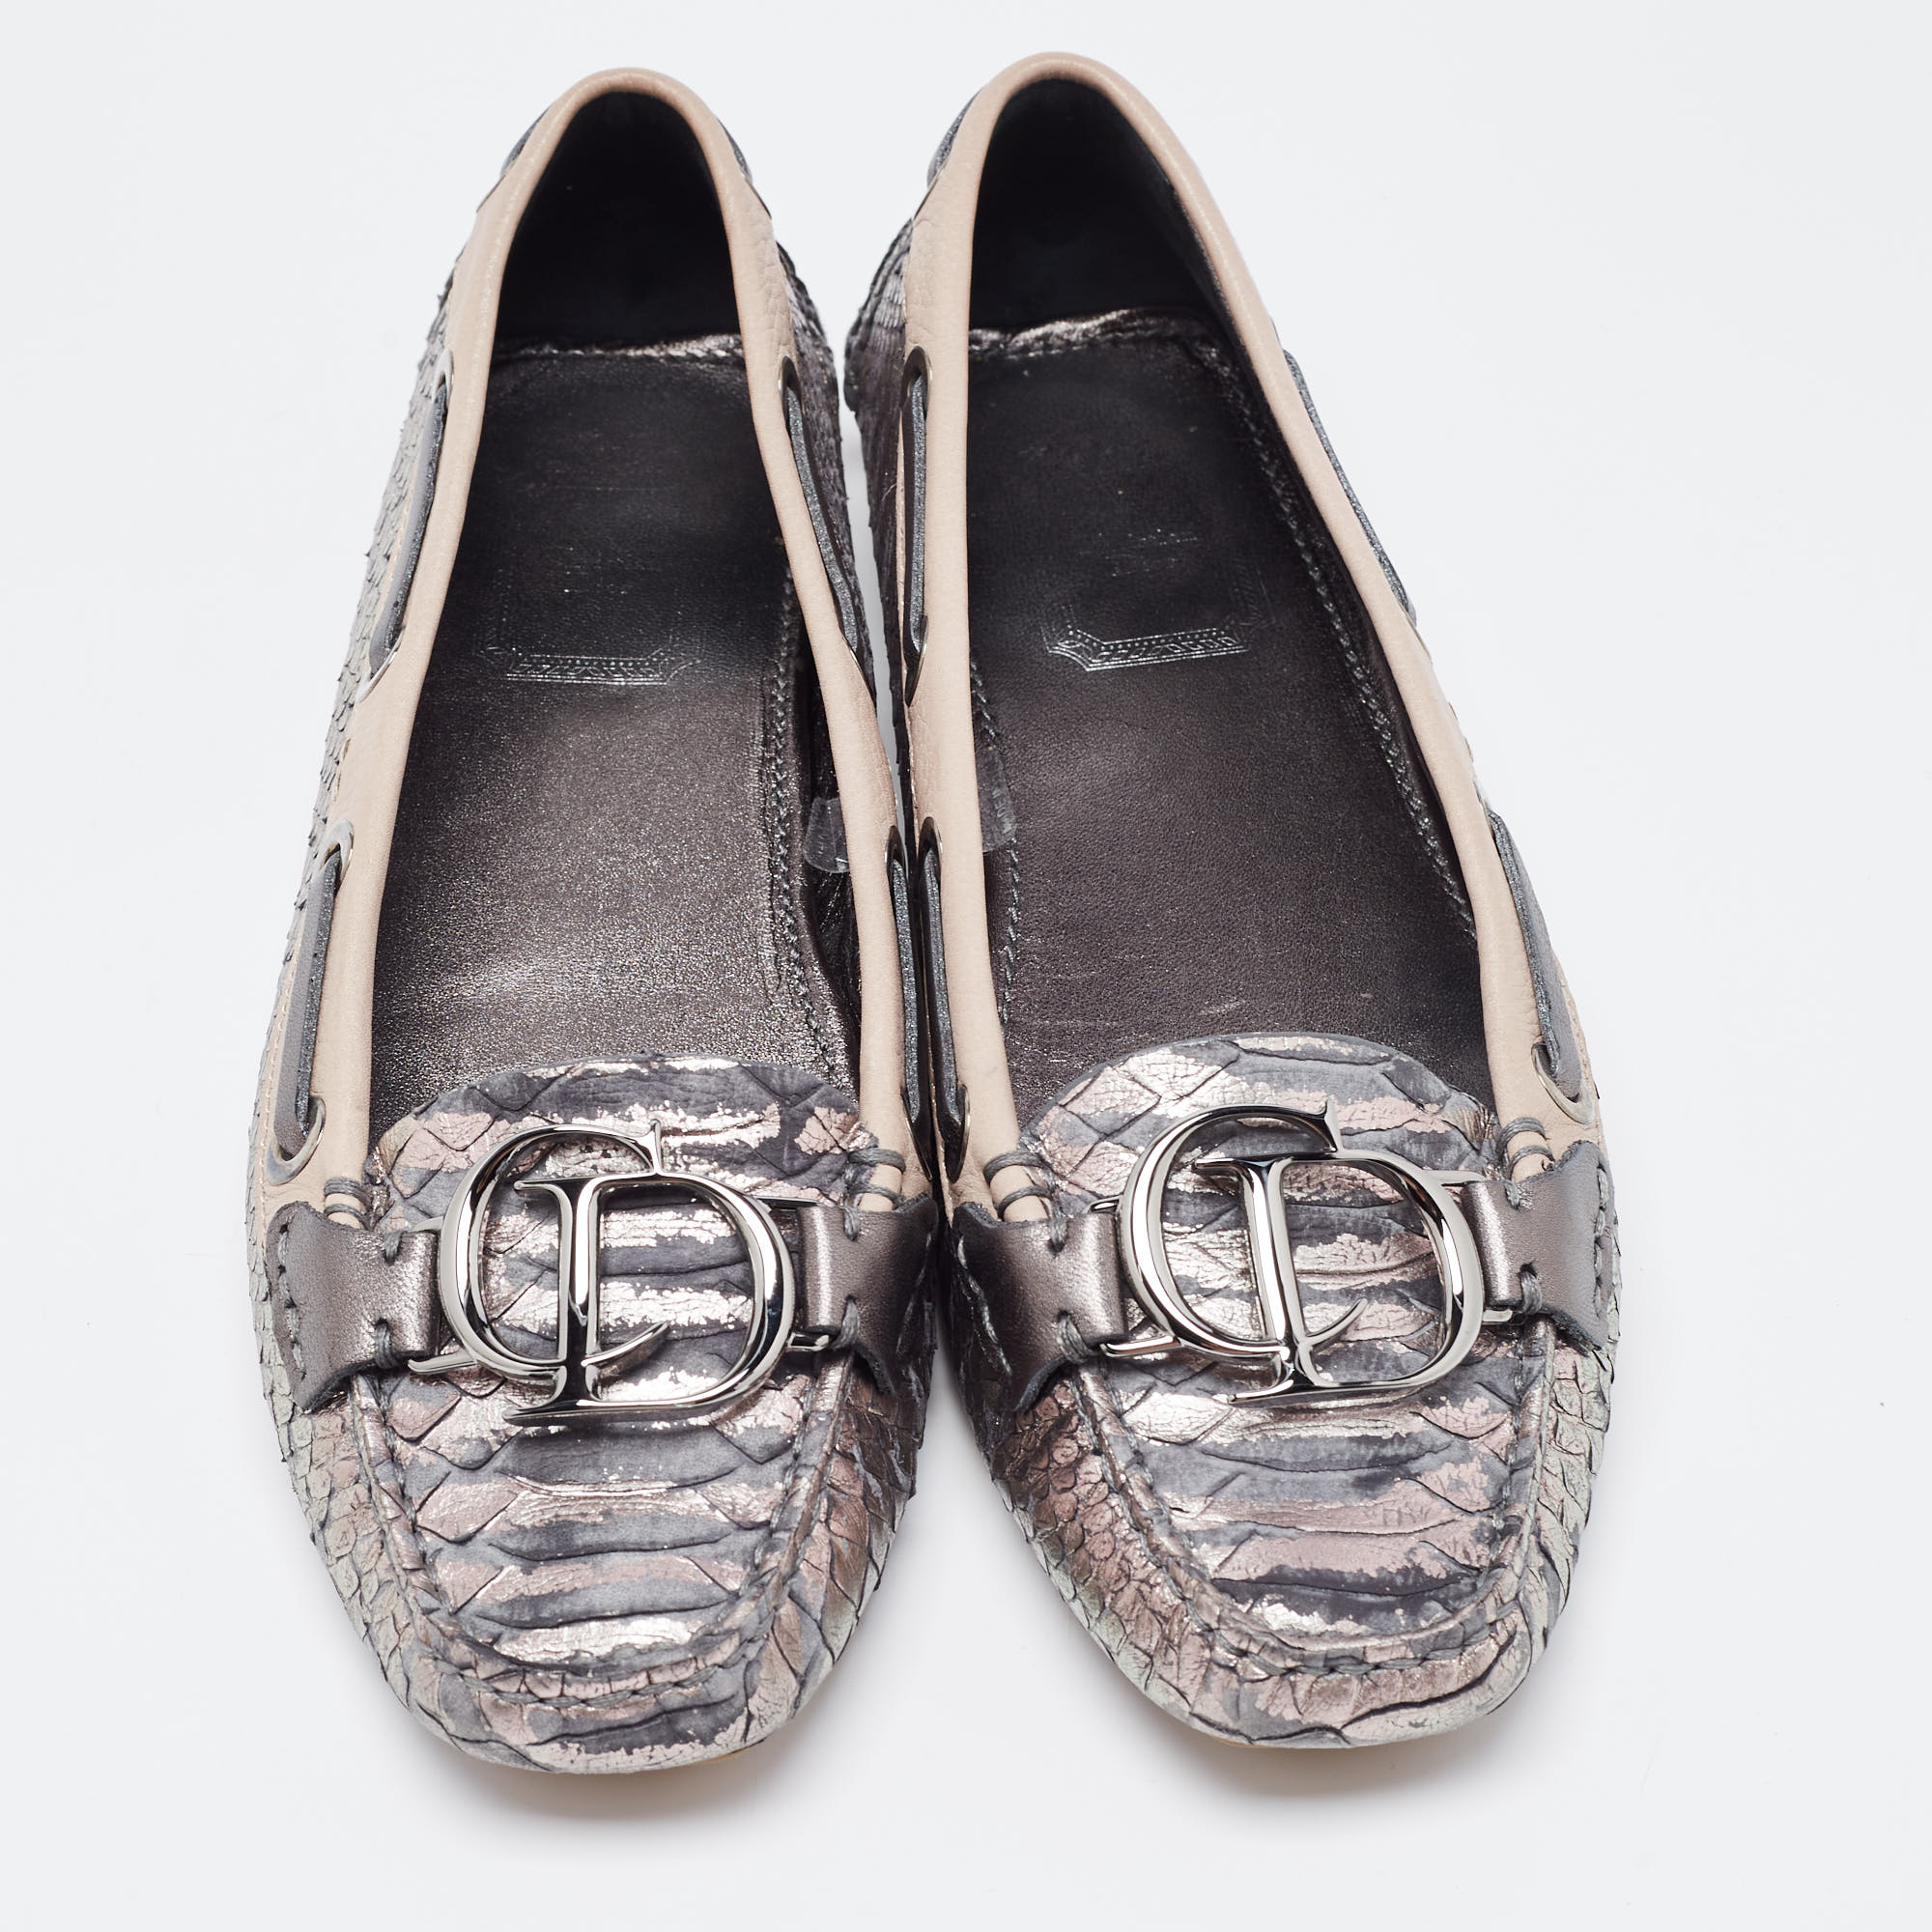 Dior Metallic Grey/Pink Python Embossed Leather CD Slip Loafers 38.5